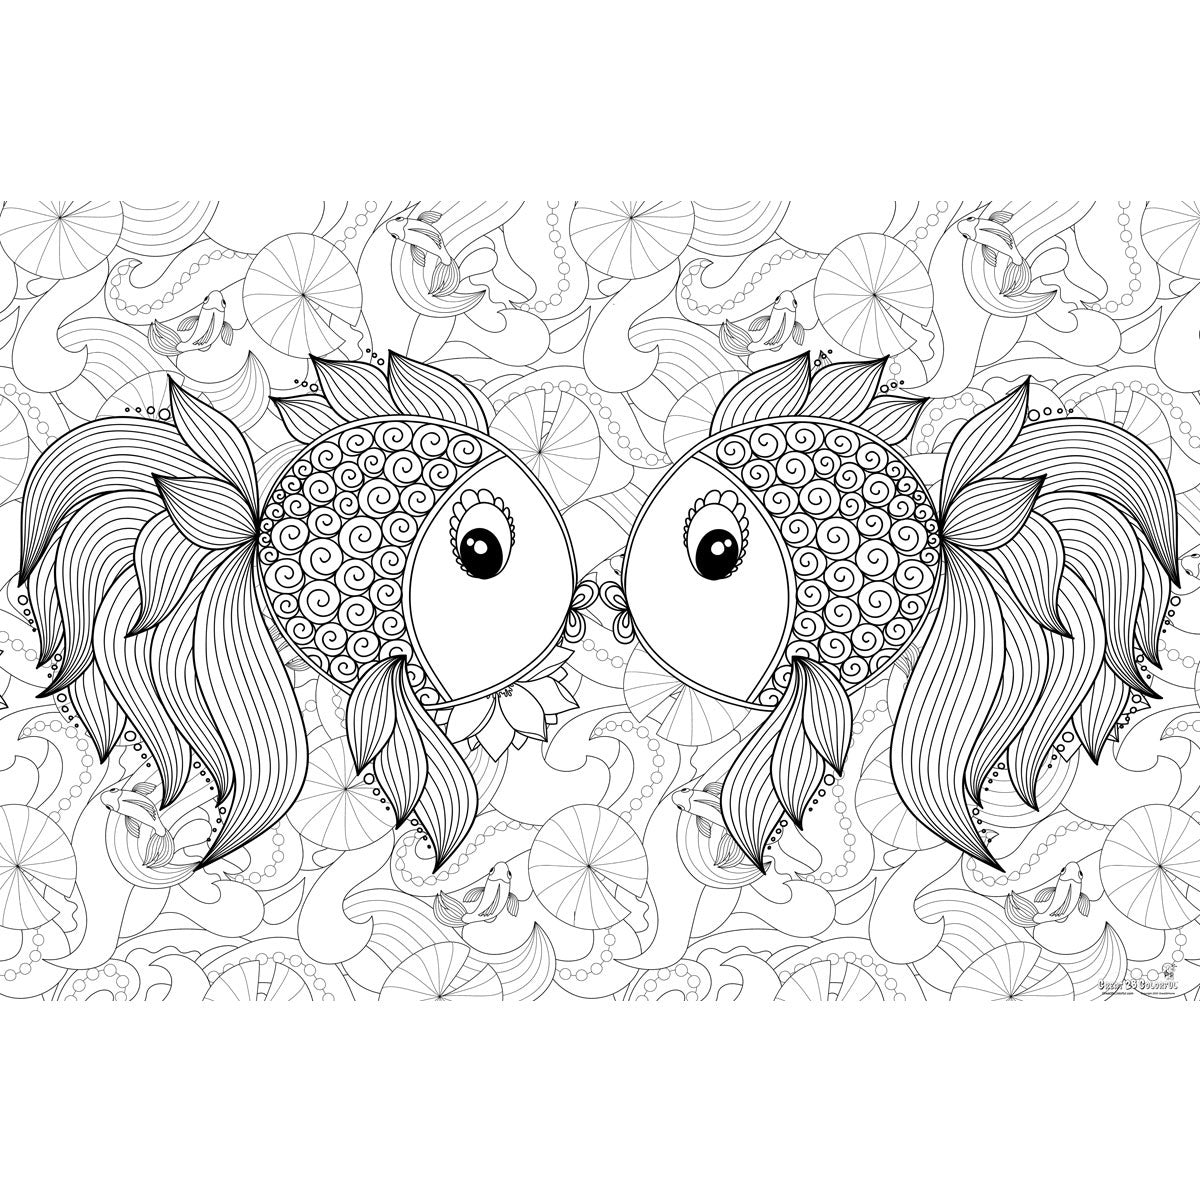 Great2bColorful Coloring Poster - 2 Little Fishies